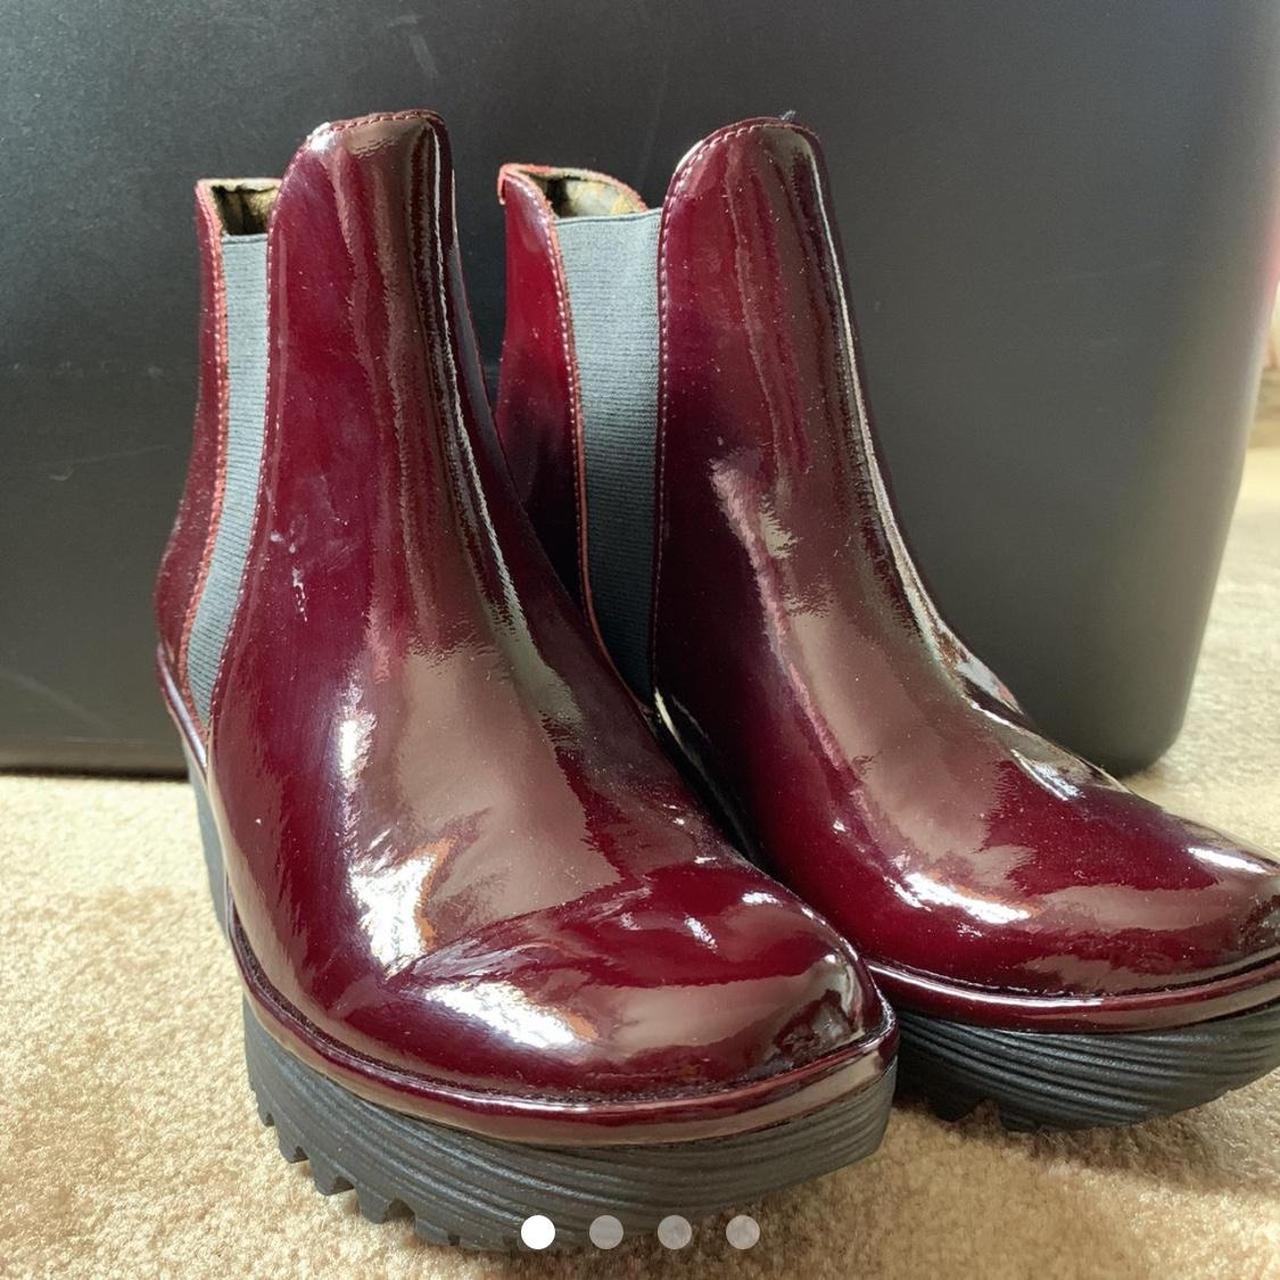 Fly London Women's Burgundy and Black Boots